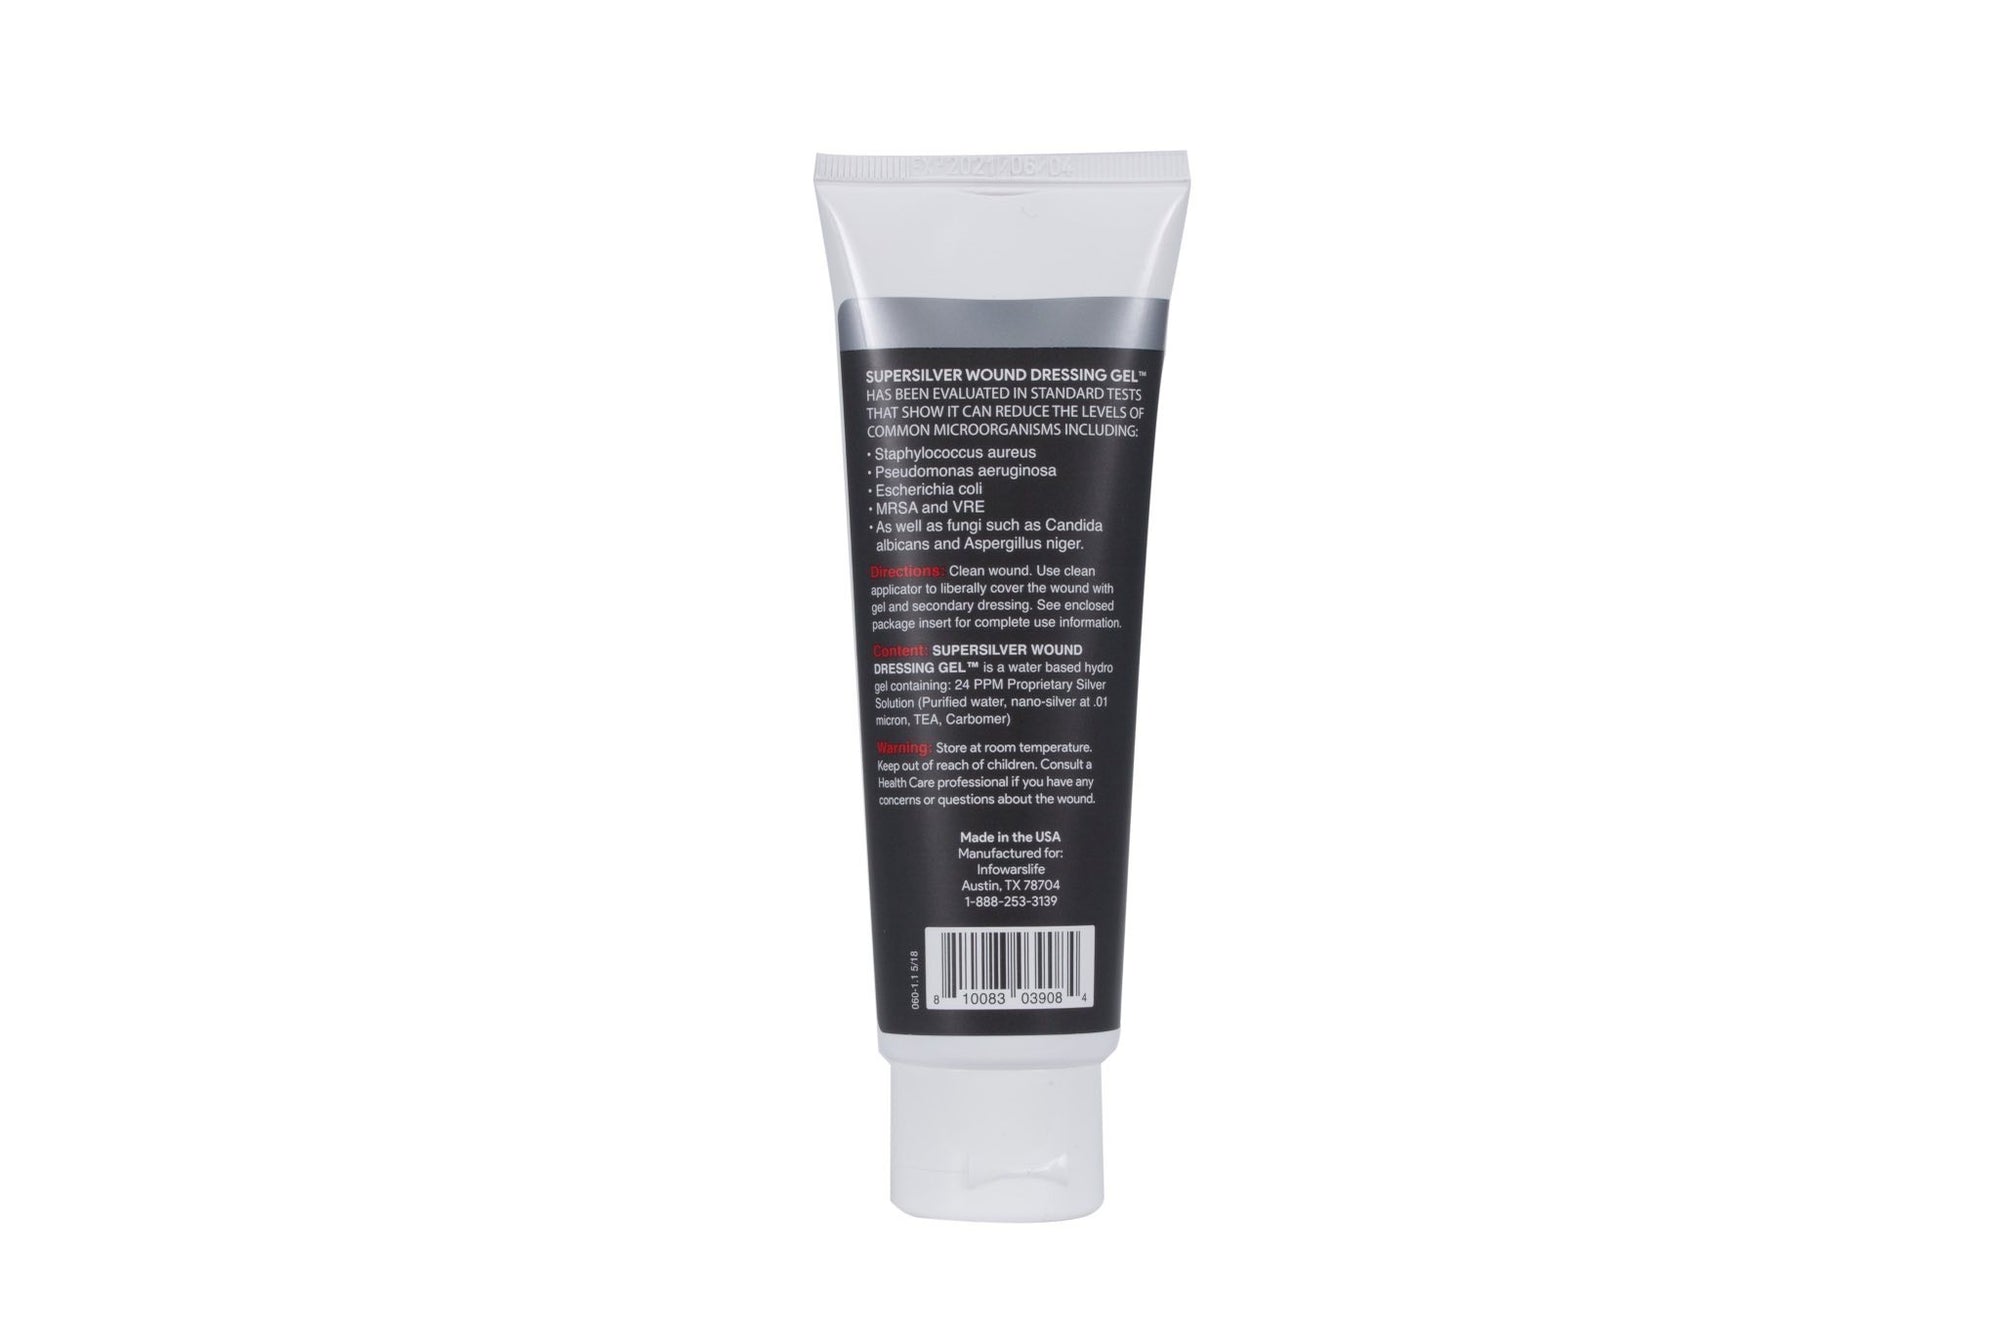 SuperSilver Wound Dressing Gel™ FIRST AID and SUNBURN RELIEF with SILVERSOL® NANO SILVER